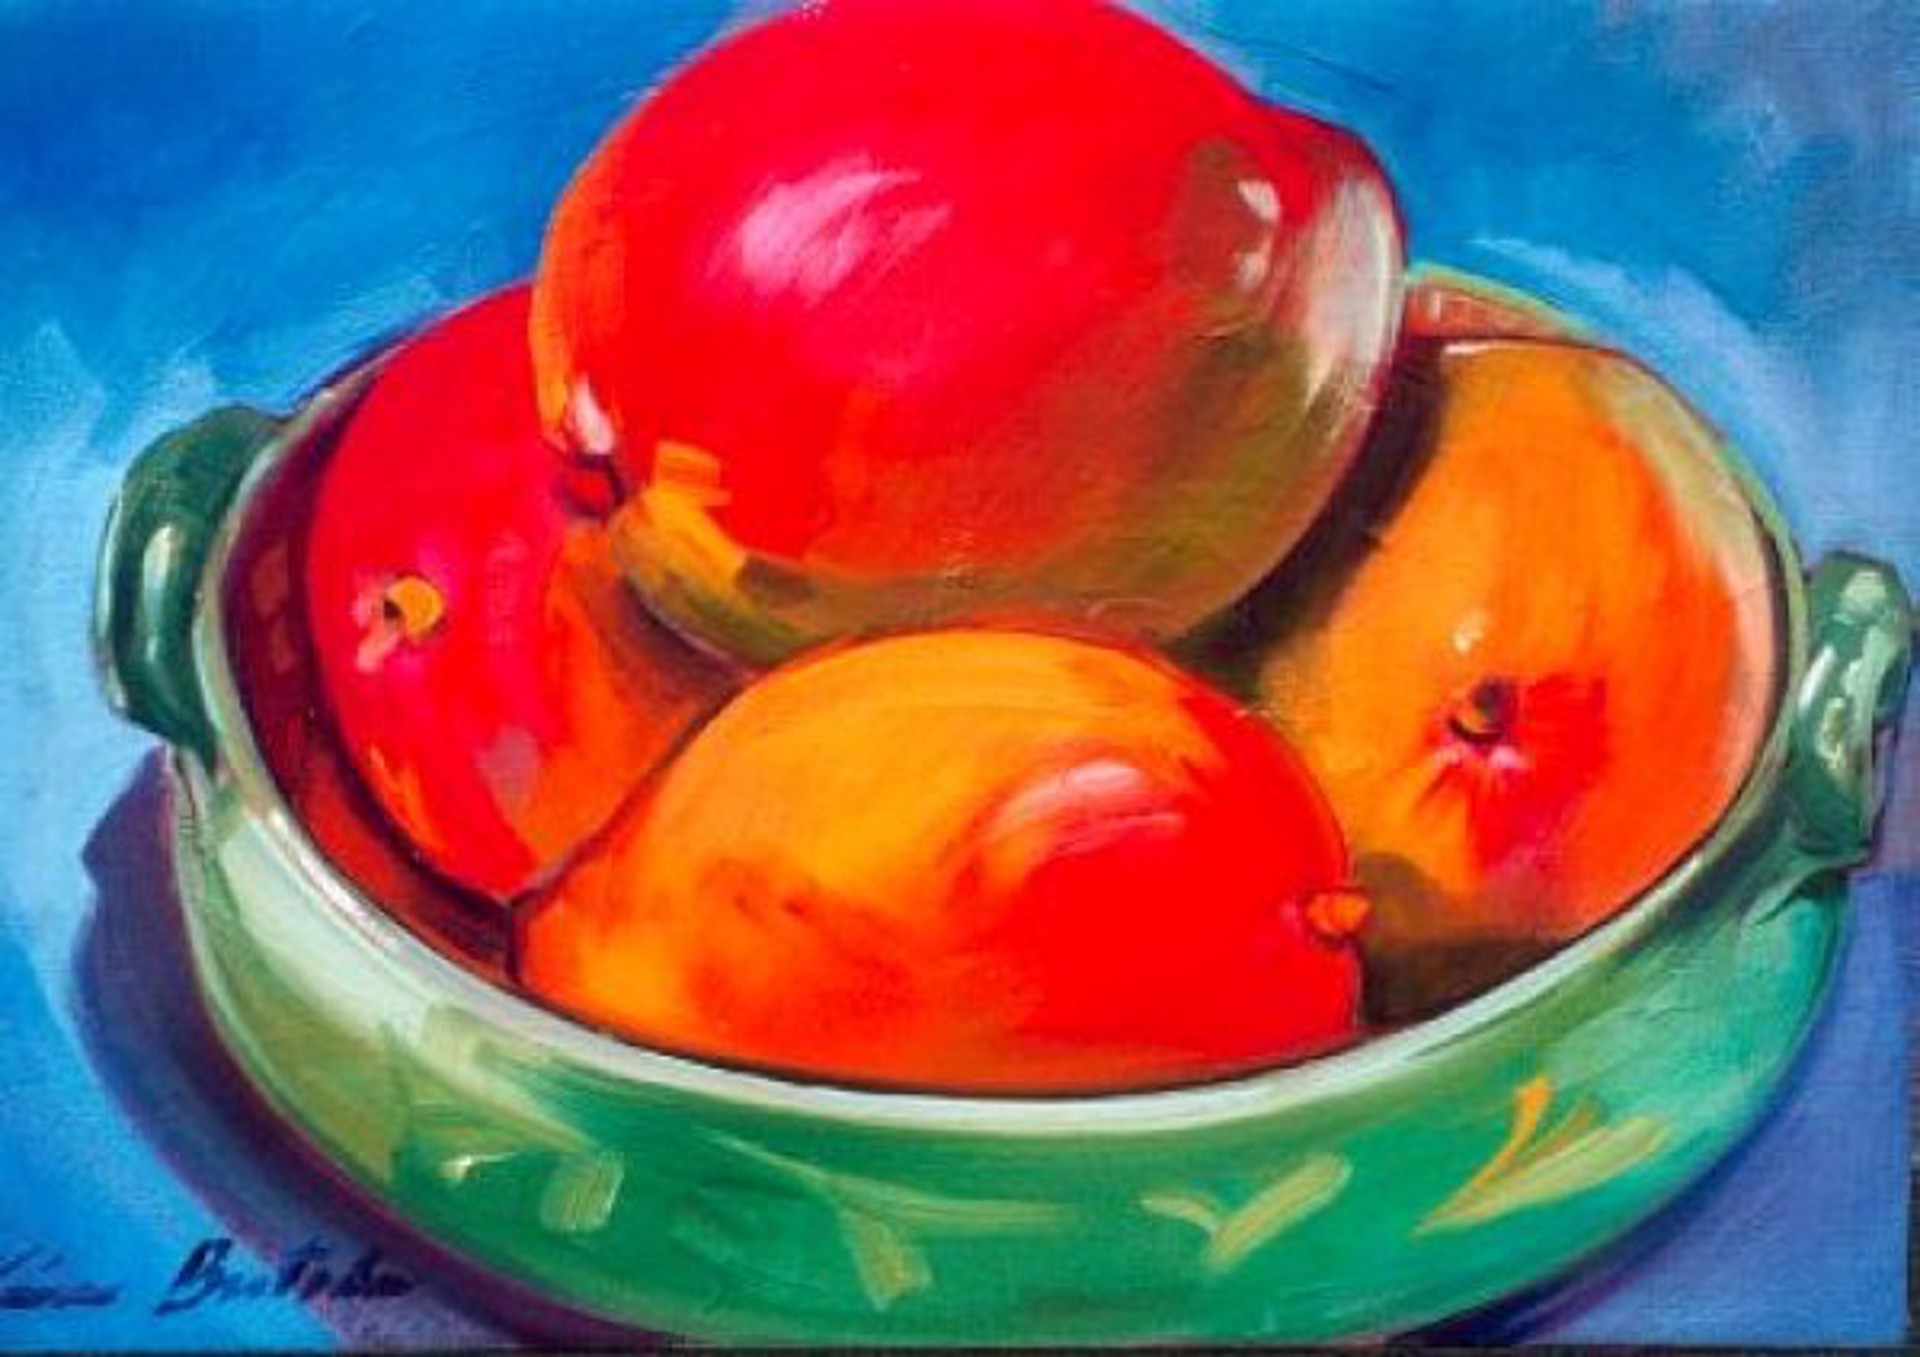 Mangoes In The Green Bowl by Maria Bertrán